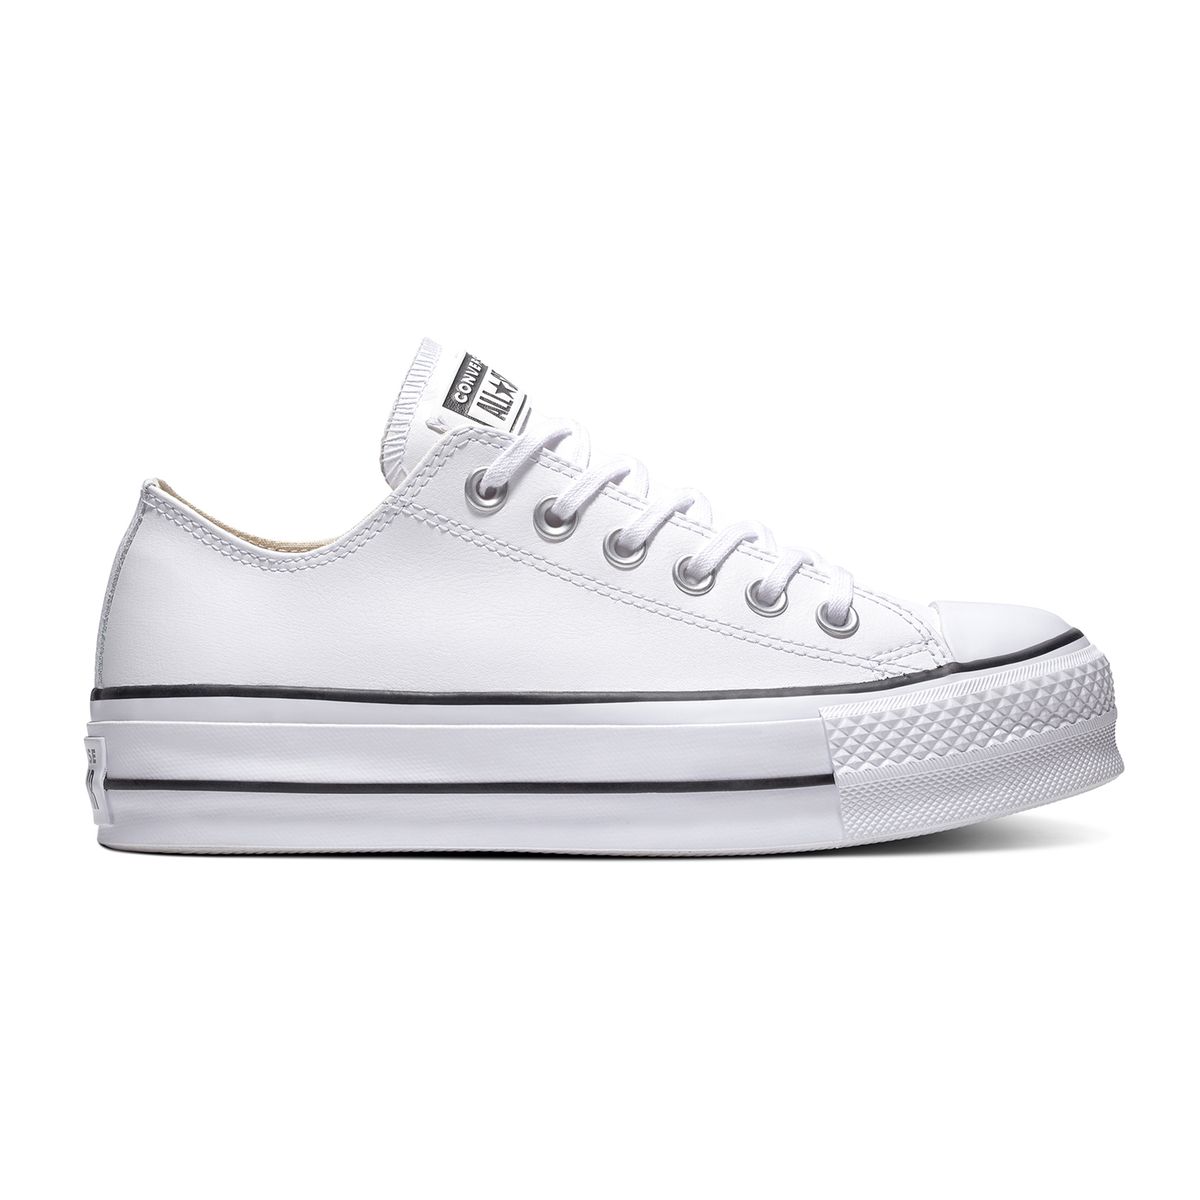 Pharynx Beer ruler Converse blanche femme | La Redoute